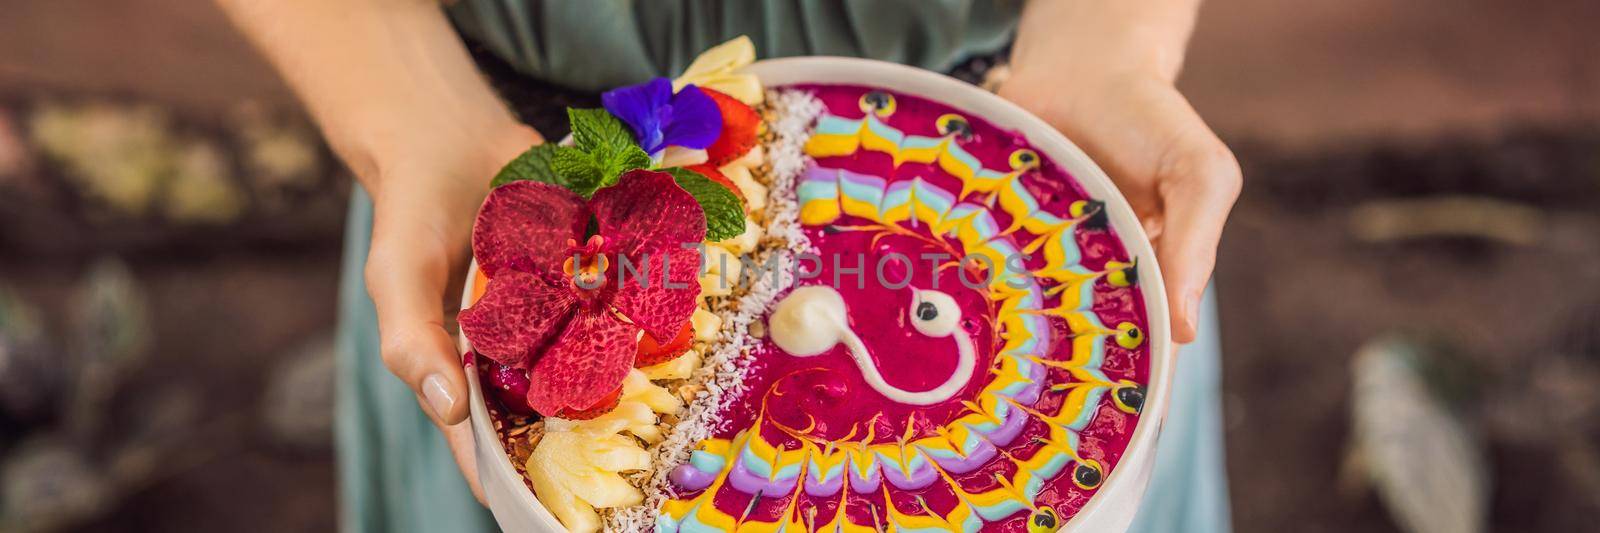 BANNER, LONG FORMAT Young woman having a mediterranean breakfast, eats Healthy tropical breakfast, smoothie bowl with tropical fruits, decorated with a pattern of colorful yogurt with turmeric and spirulina. It is also decorated with fruits, flowers, chia seeds, coconut, granola, pineapple, mint and strawberries.